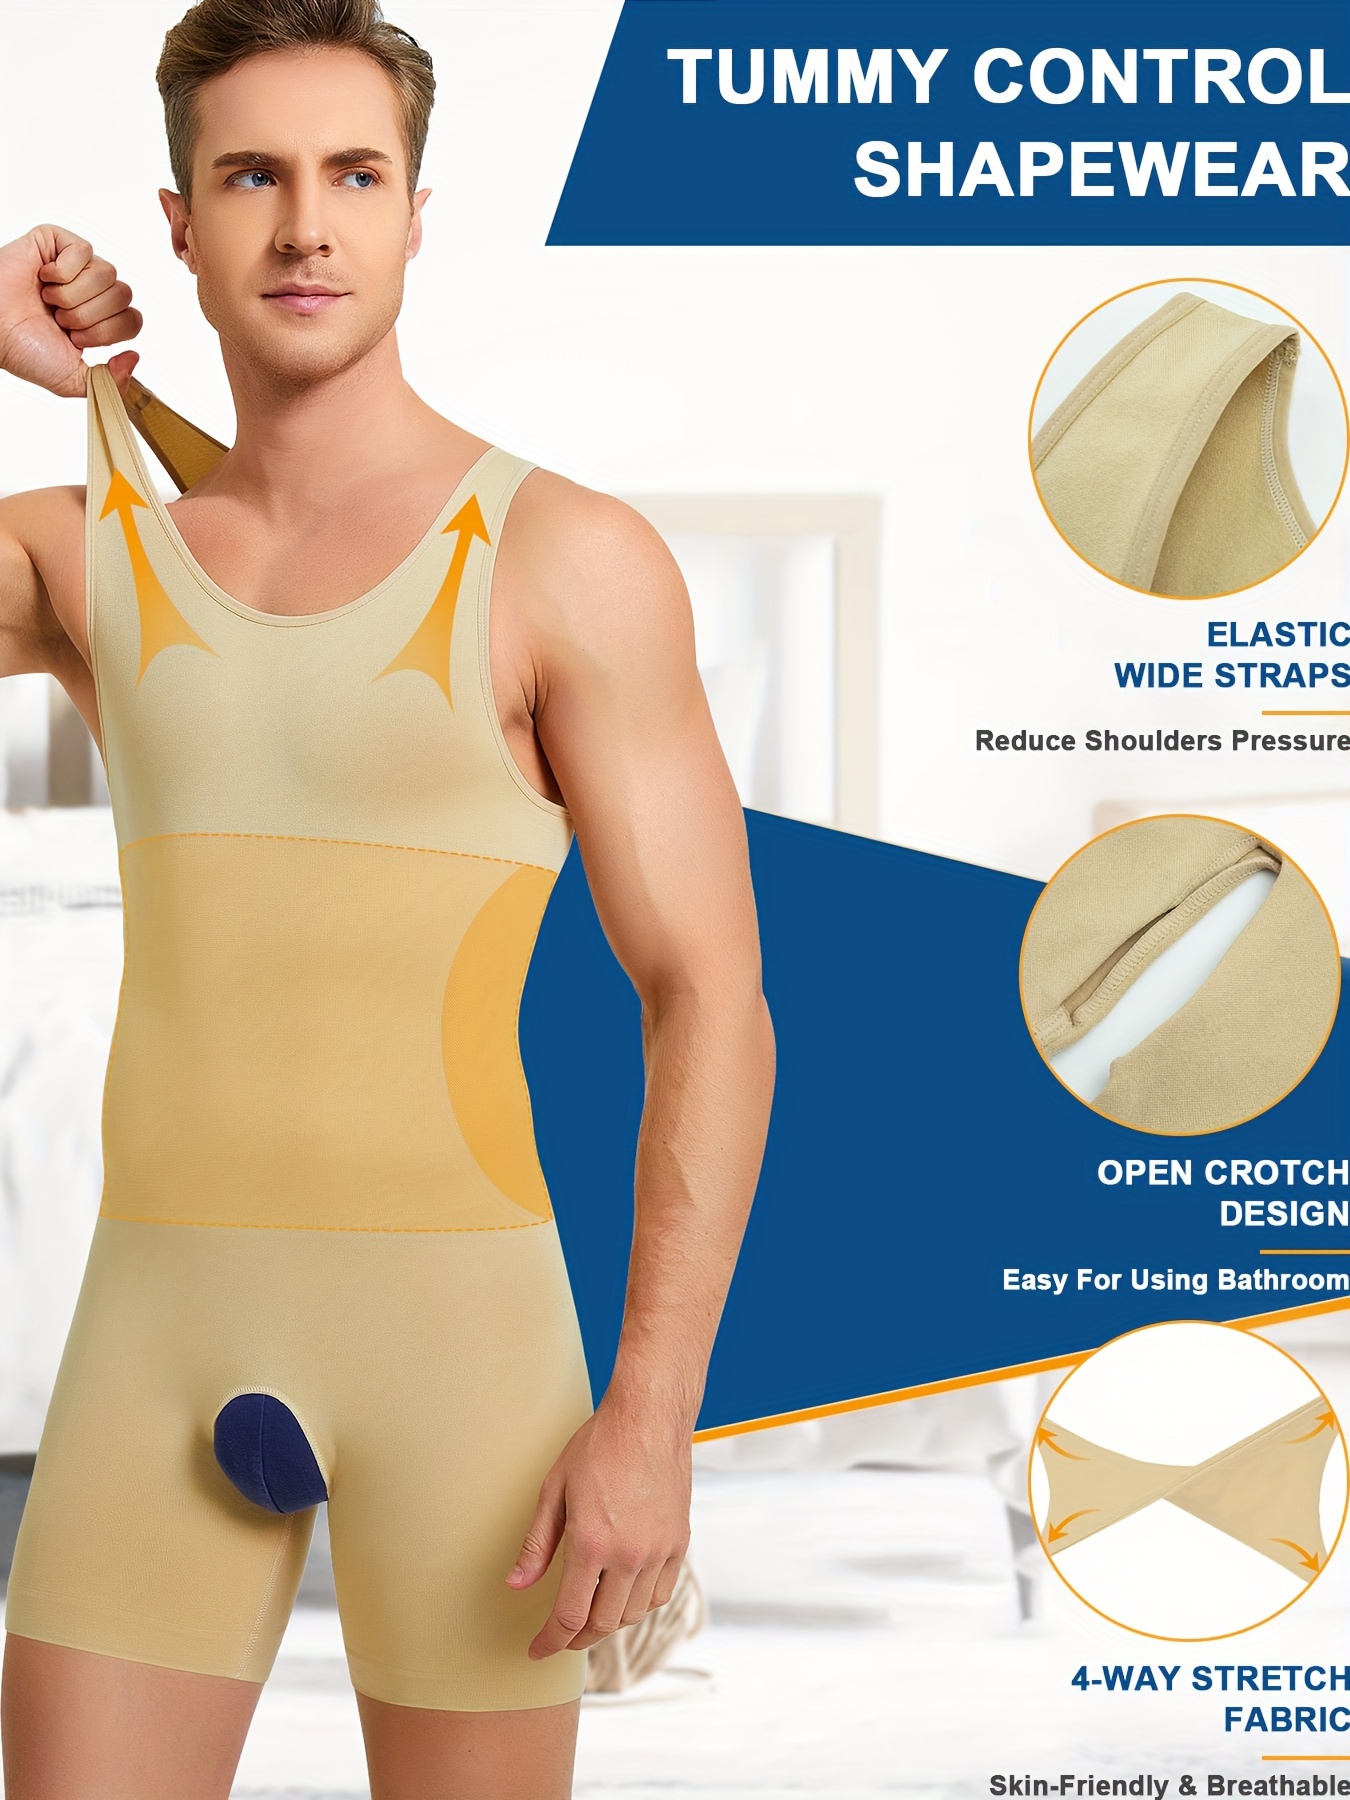 Stretchy Fit Men's Body Shaper – Care Me